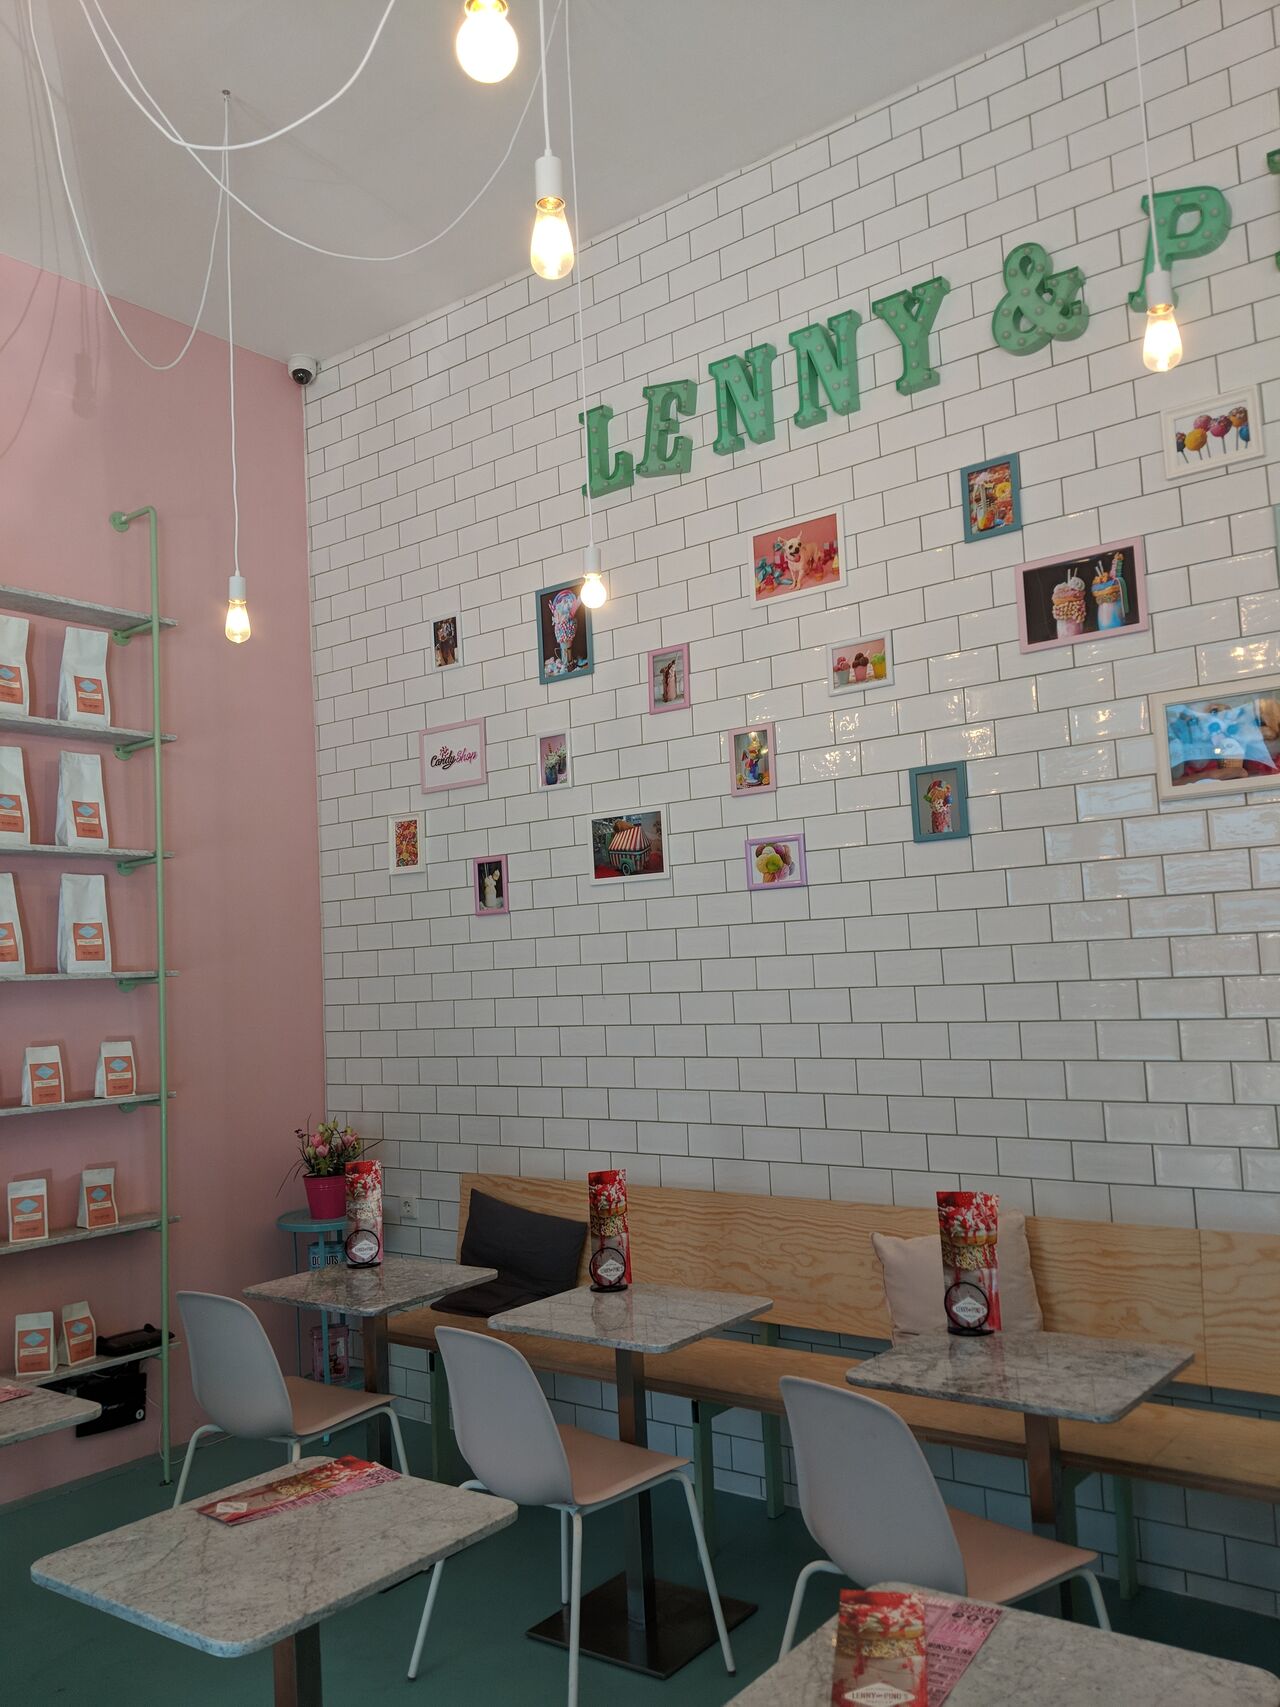 A photo of Lenny and Pino’s